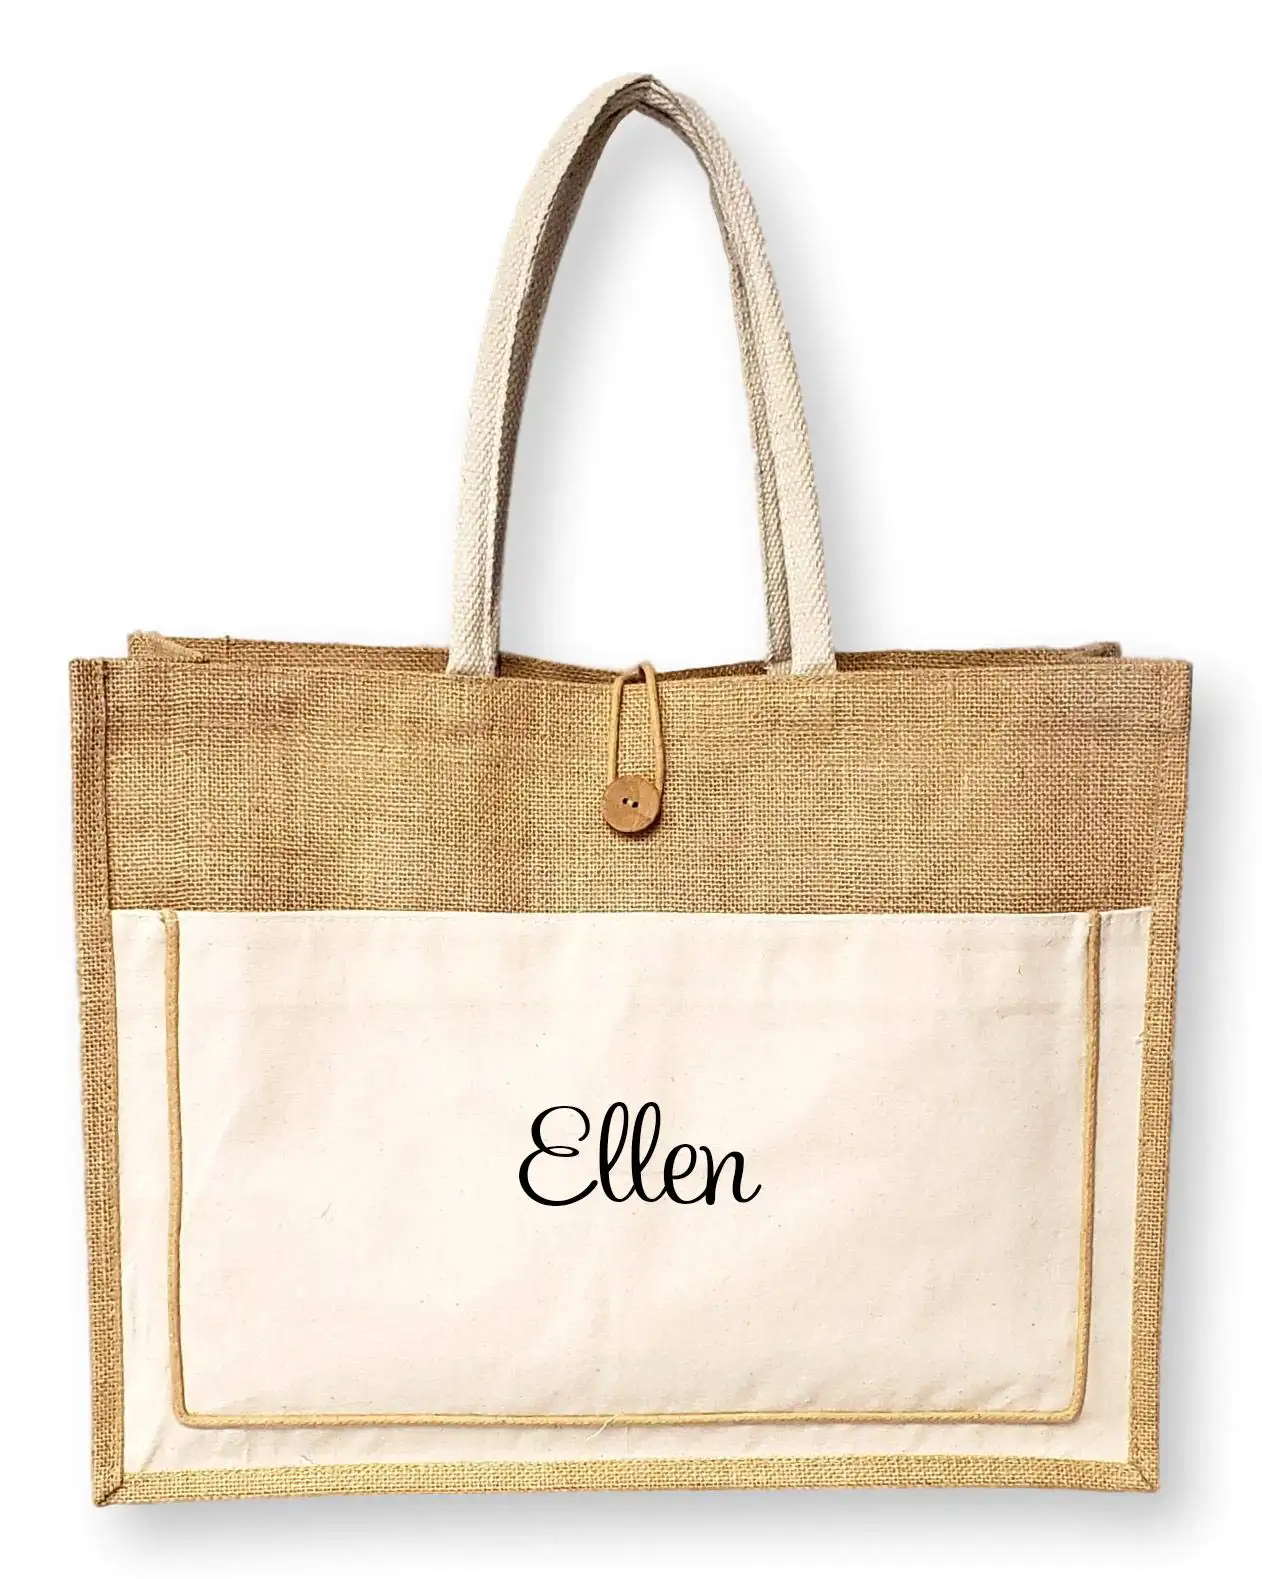 Reusable Large Tote Grocery Vintage Style Jute With Cotton Pocket Shopping Bag